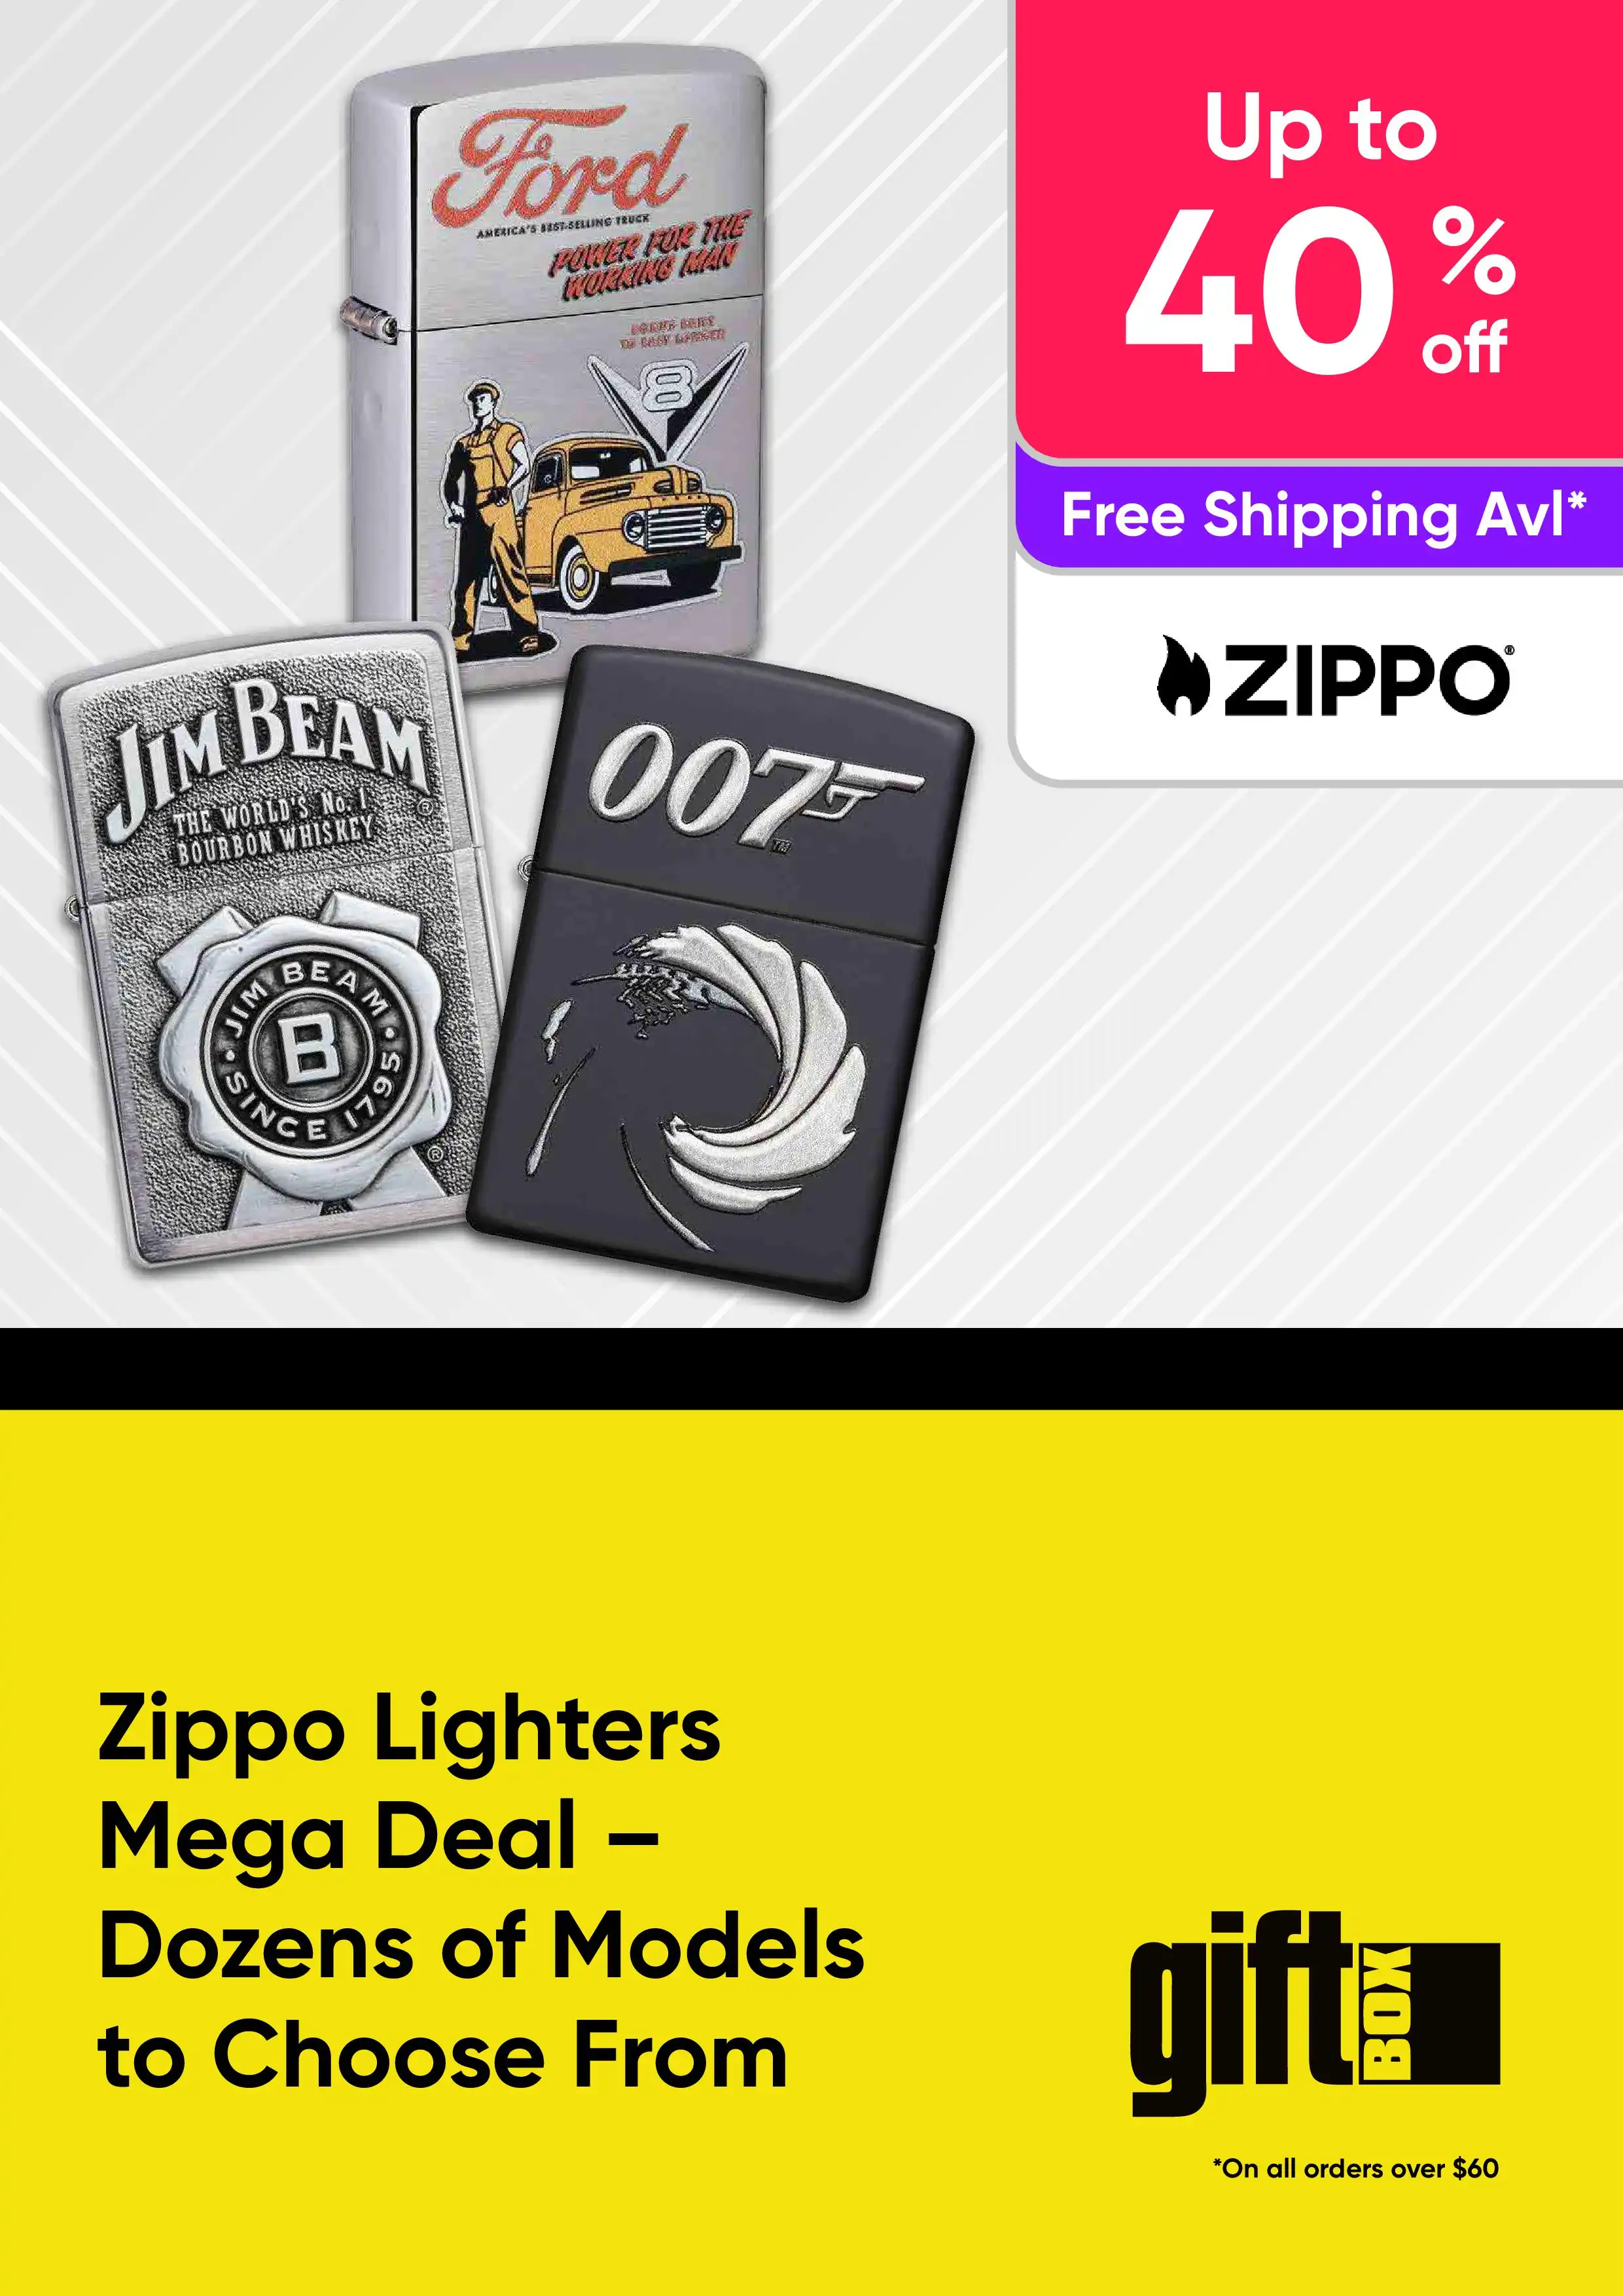 Zippo Lighters Mega Deal - Dozens of Models to Choose From - Up to 40% off